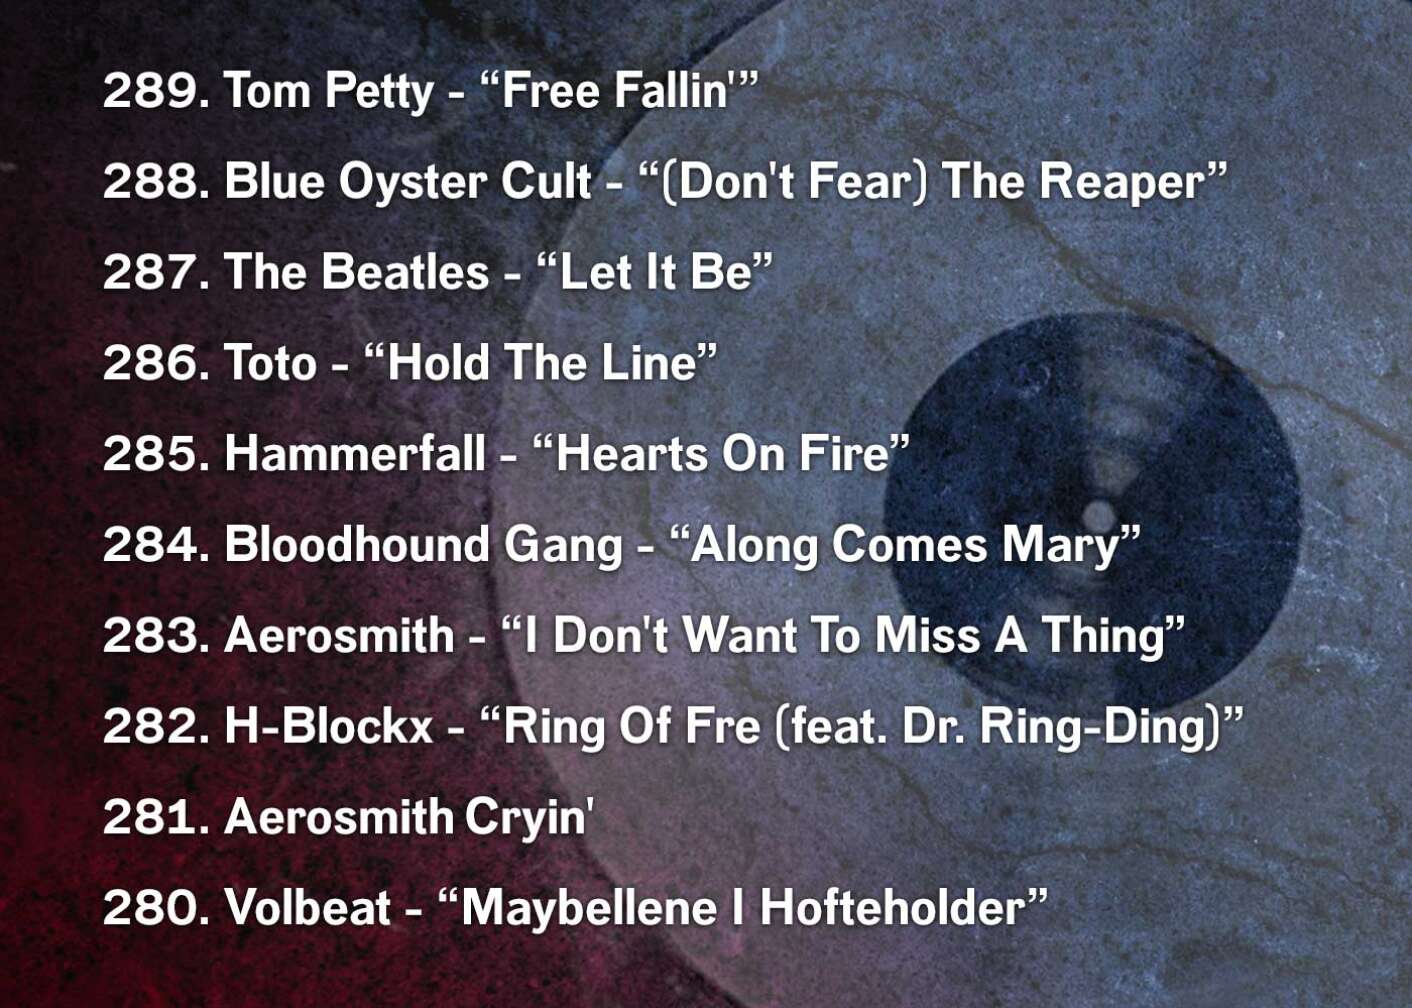 289. Tom Petty - “Free Fallin'” 288. Blue Oyster Cult - “(Don't Fear) The Reaper” 287. The Beatles - “Let It Be” 286. Toto - “Hold The Line” 285. Hammerfall - “Hearts On Fire” 284. Bloodhound Gang - “Along Comes Mary” 283. Aerosmith - “I Don't Want To Miss A Thing” 282. H-Blockx - “Ring Of Fre (feat. Dr. Ring-Ding)” 281. Aerosmith	Cryin' 280. Volbeat - “Maybellene I Hofteholder”